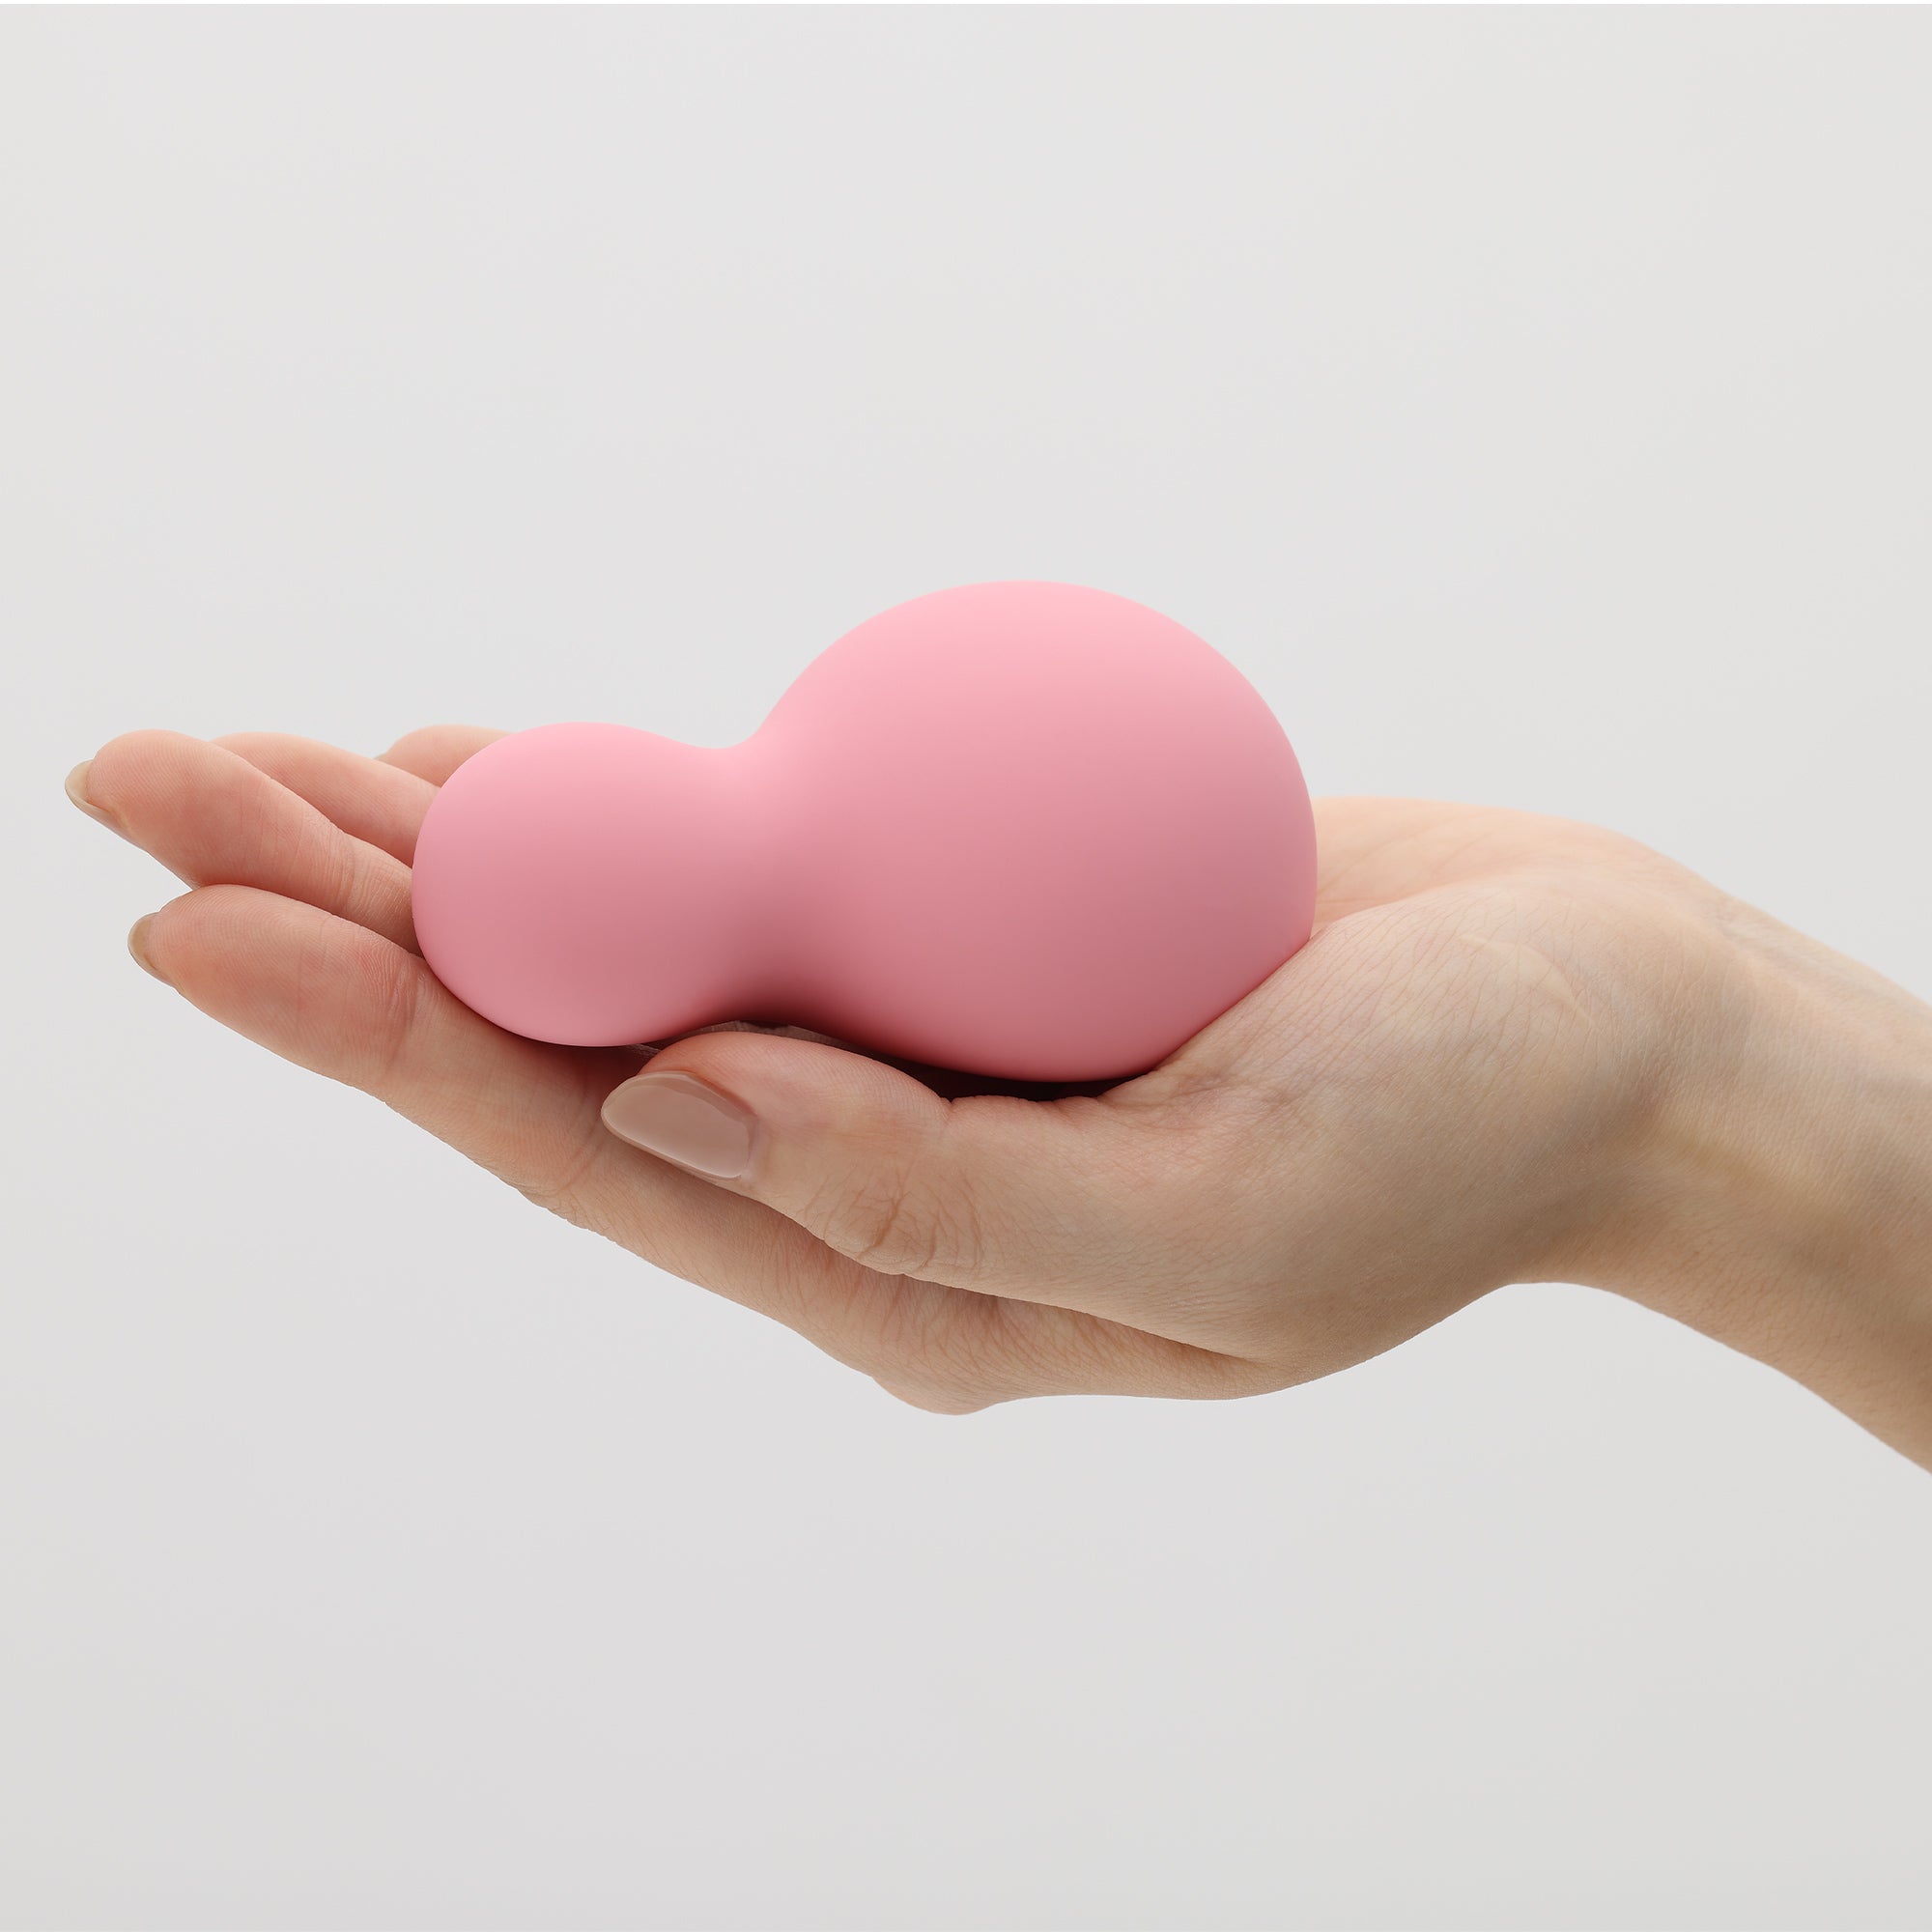 Yuki Nadeshiko Pink, a sophisticated female personal pleasure device designed for ergonomic comfort and intimate enjoyment. With a soft pink hue and graceful curves, this product is available from the UK TENGA STORE and reflects an artful blend of form and function